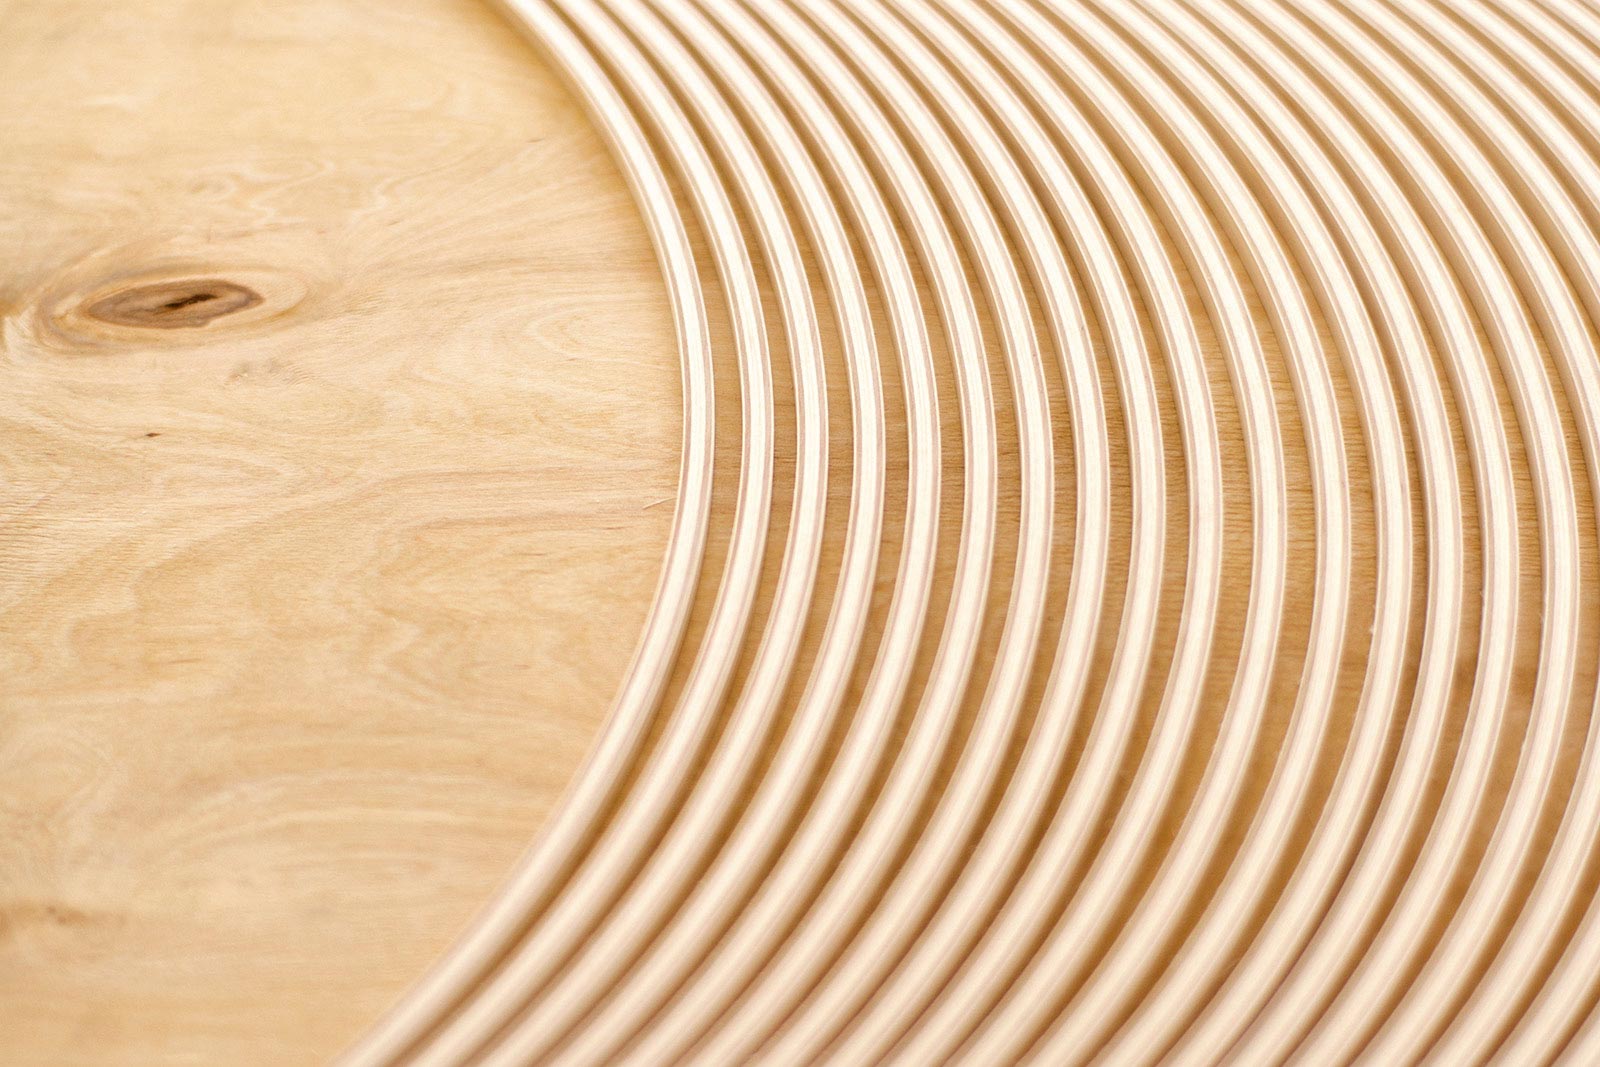 A close up of the curved wooden slats used in Secto Design lamps.